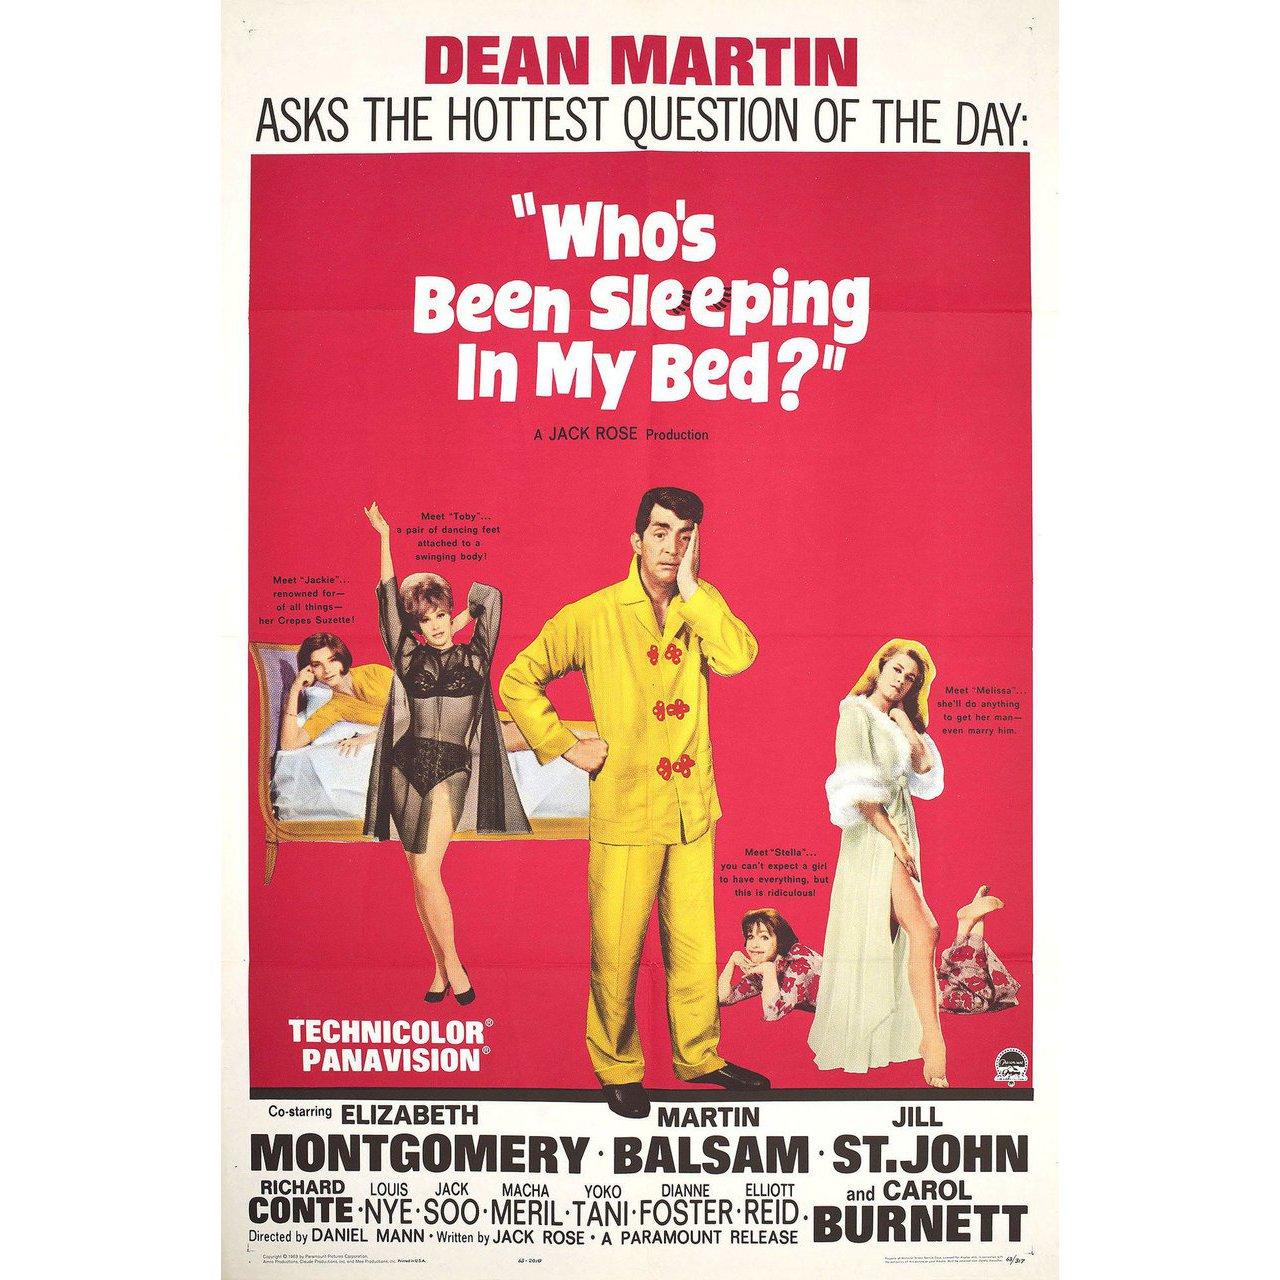 Original 1963 U.S. one sheet poster for the film Who's Been Sleeping in My Bed? directed by Daniel Mann with Dean Martin / Elizabeth Montgomery / Martin Balsam / Jill St. John. Fine condition, folded. Many original posters were issued folded or were